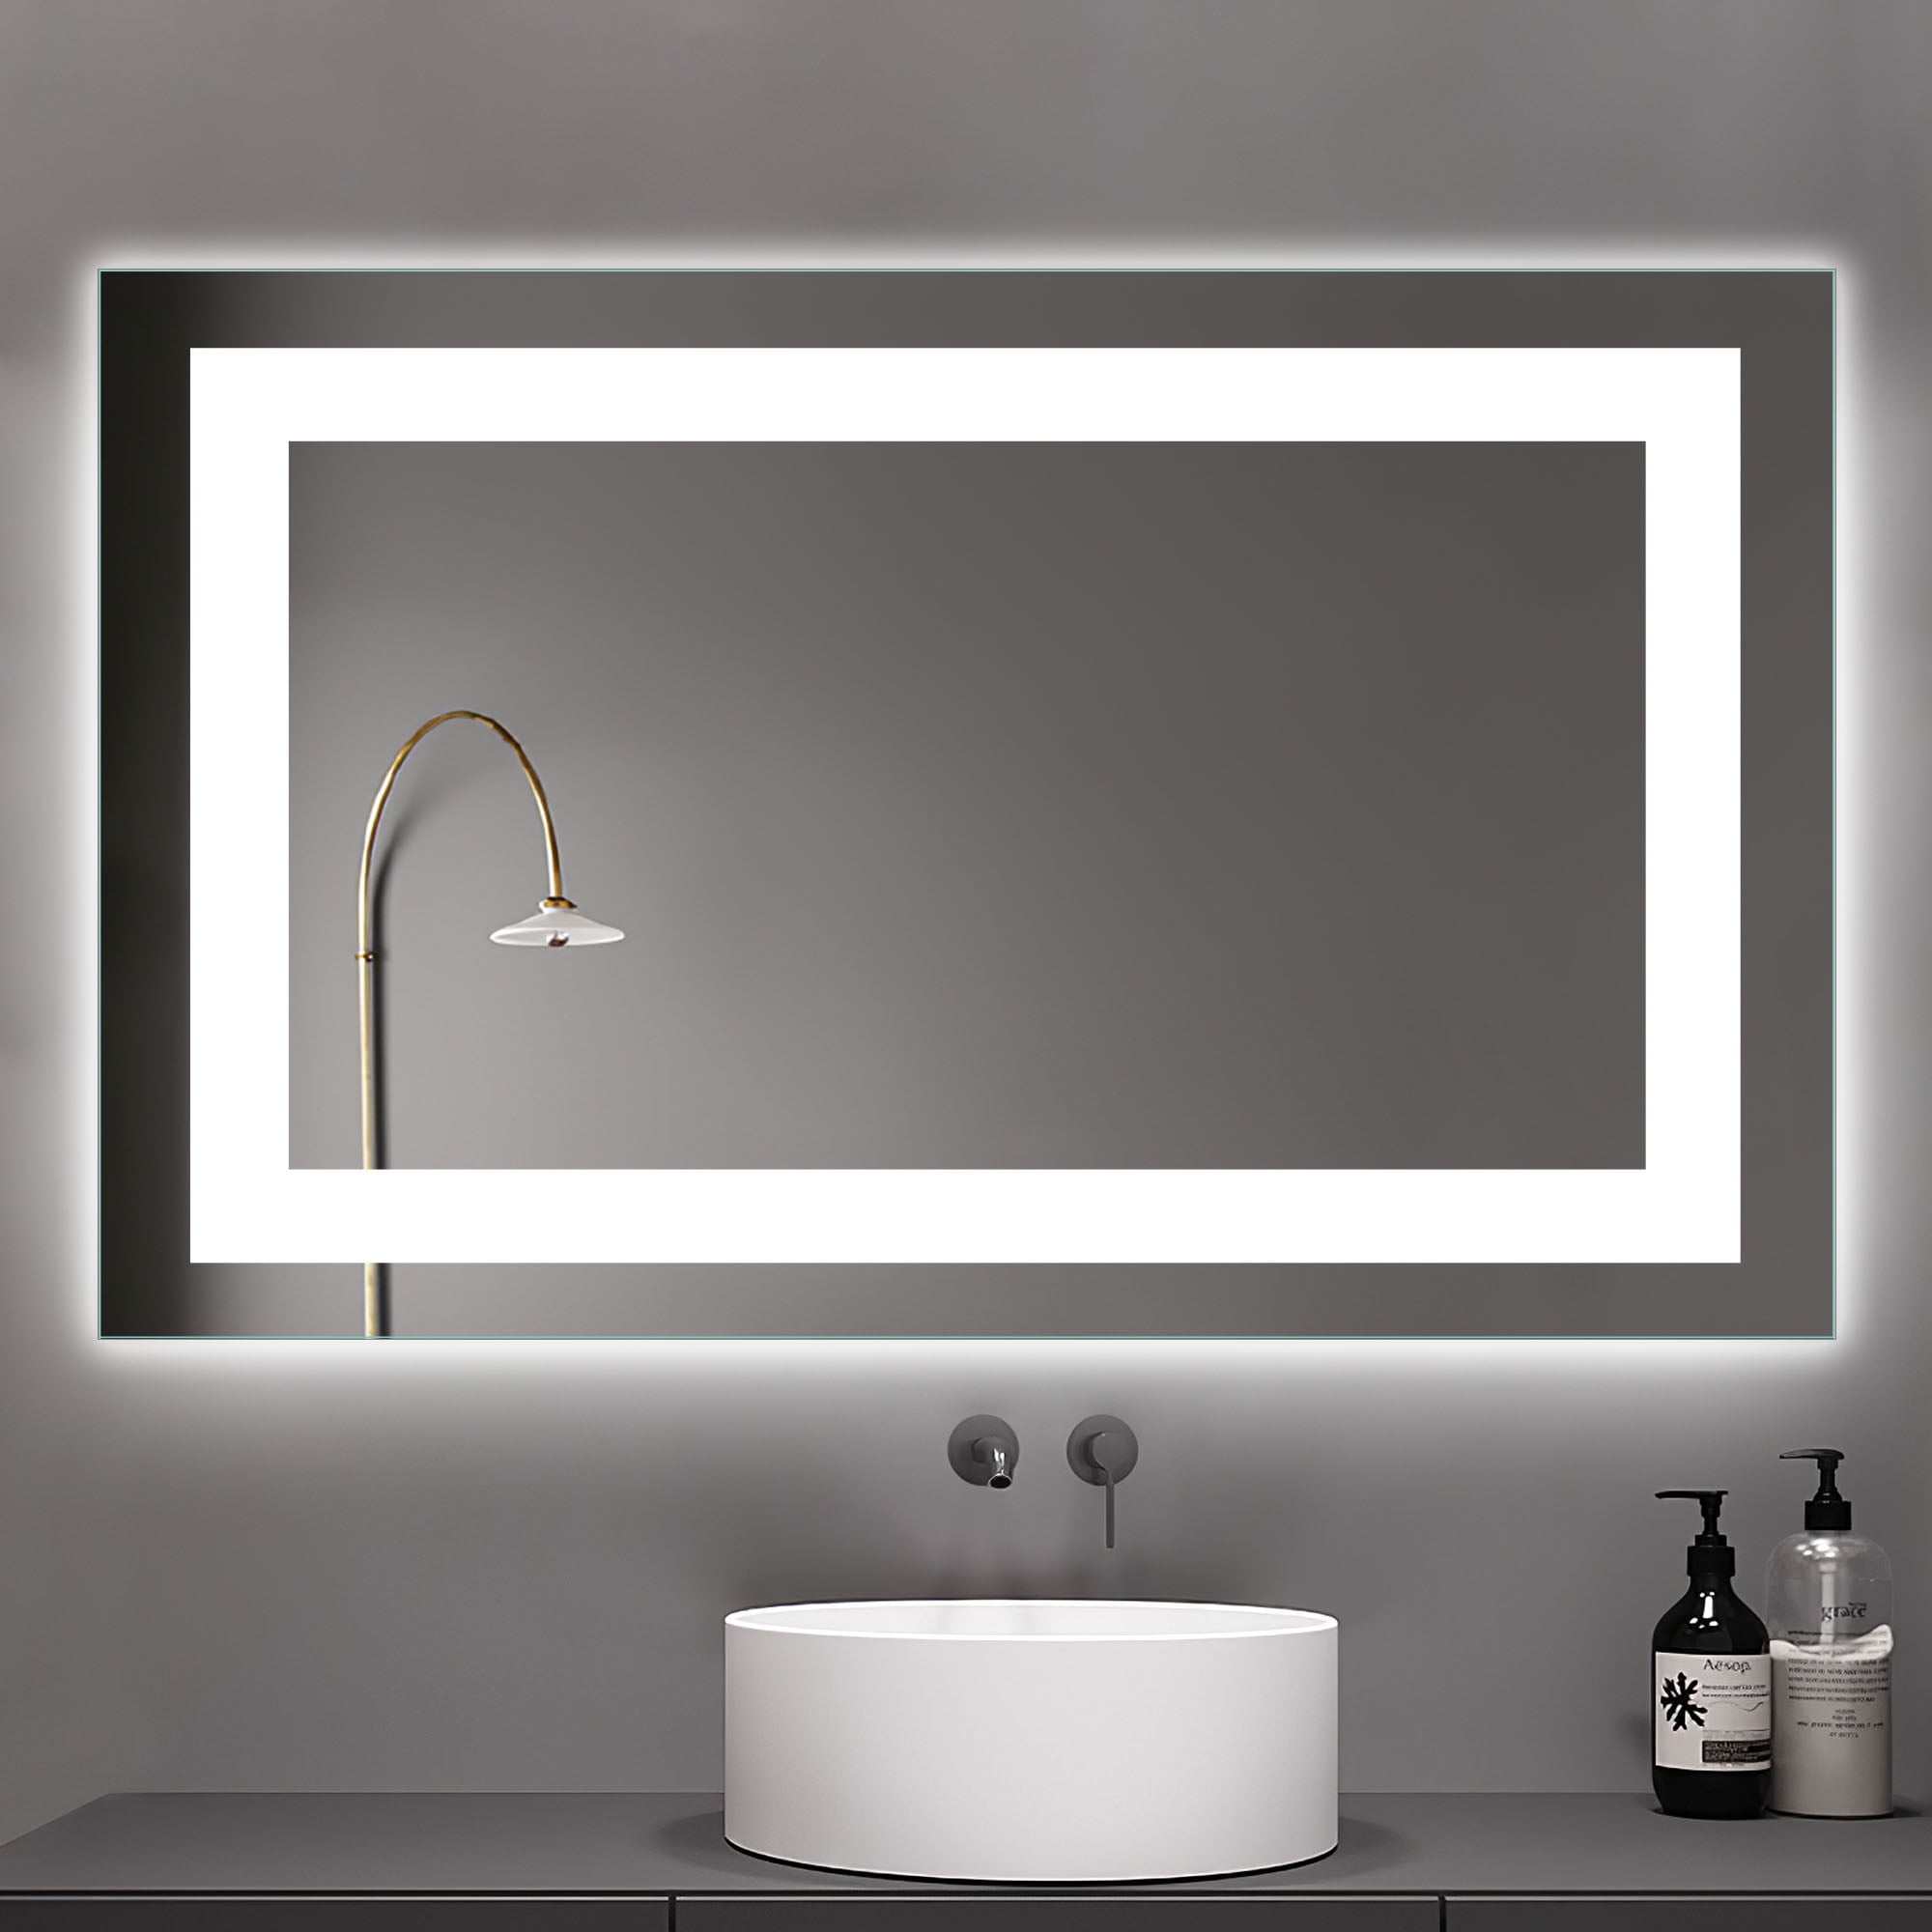 Details about   LED Wall Sconces Light Bathroom Vanity Mirror Front Lamp Fixture Stainless steel 